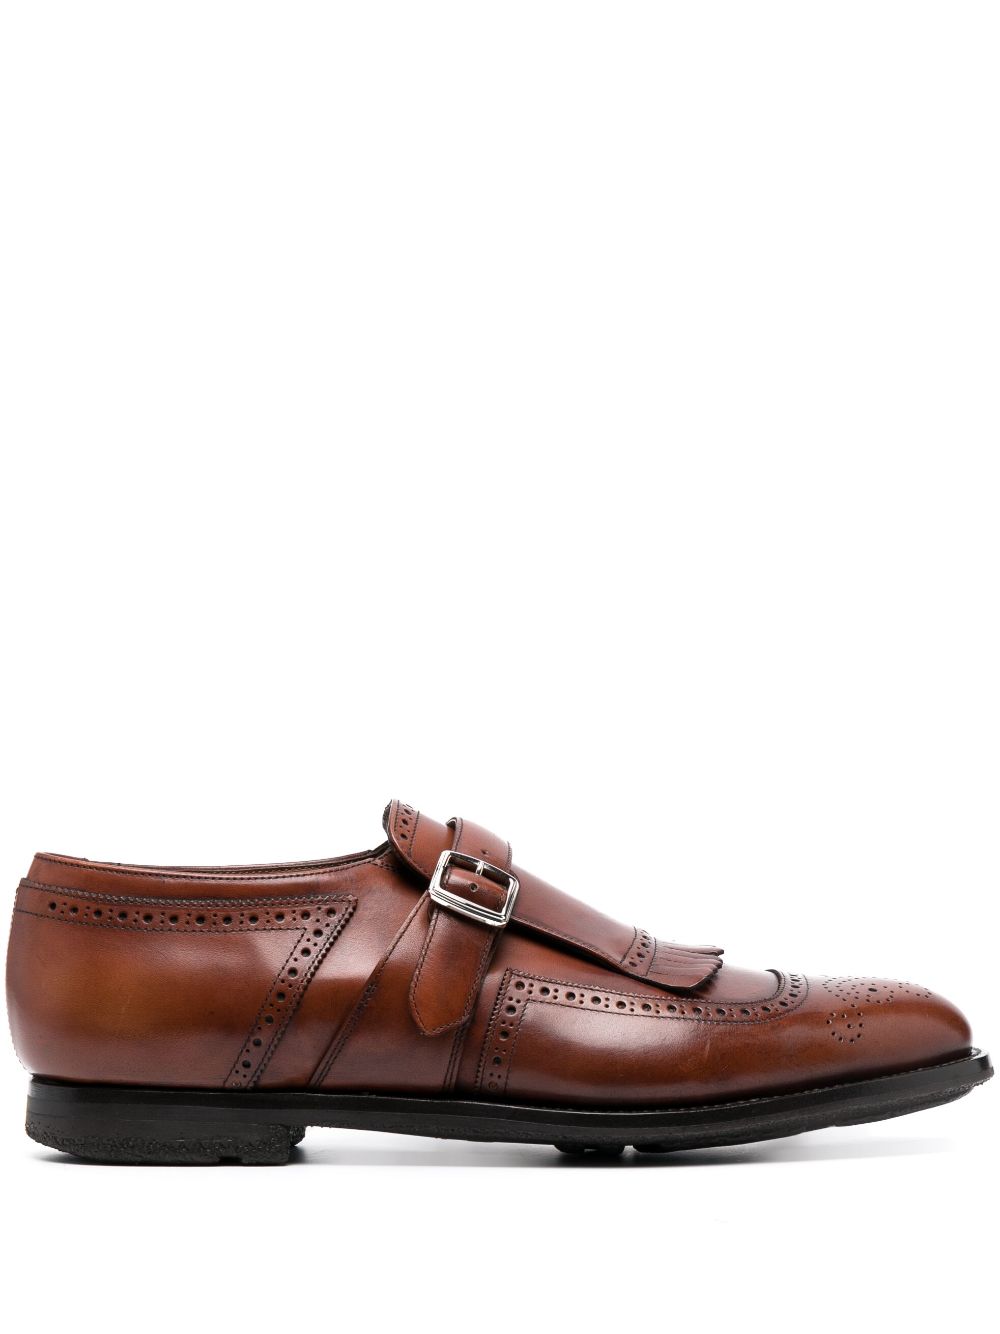 CHURCH'S TASSEL-DETAIL LEATHER MONK SHOES